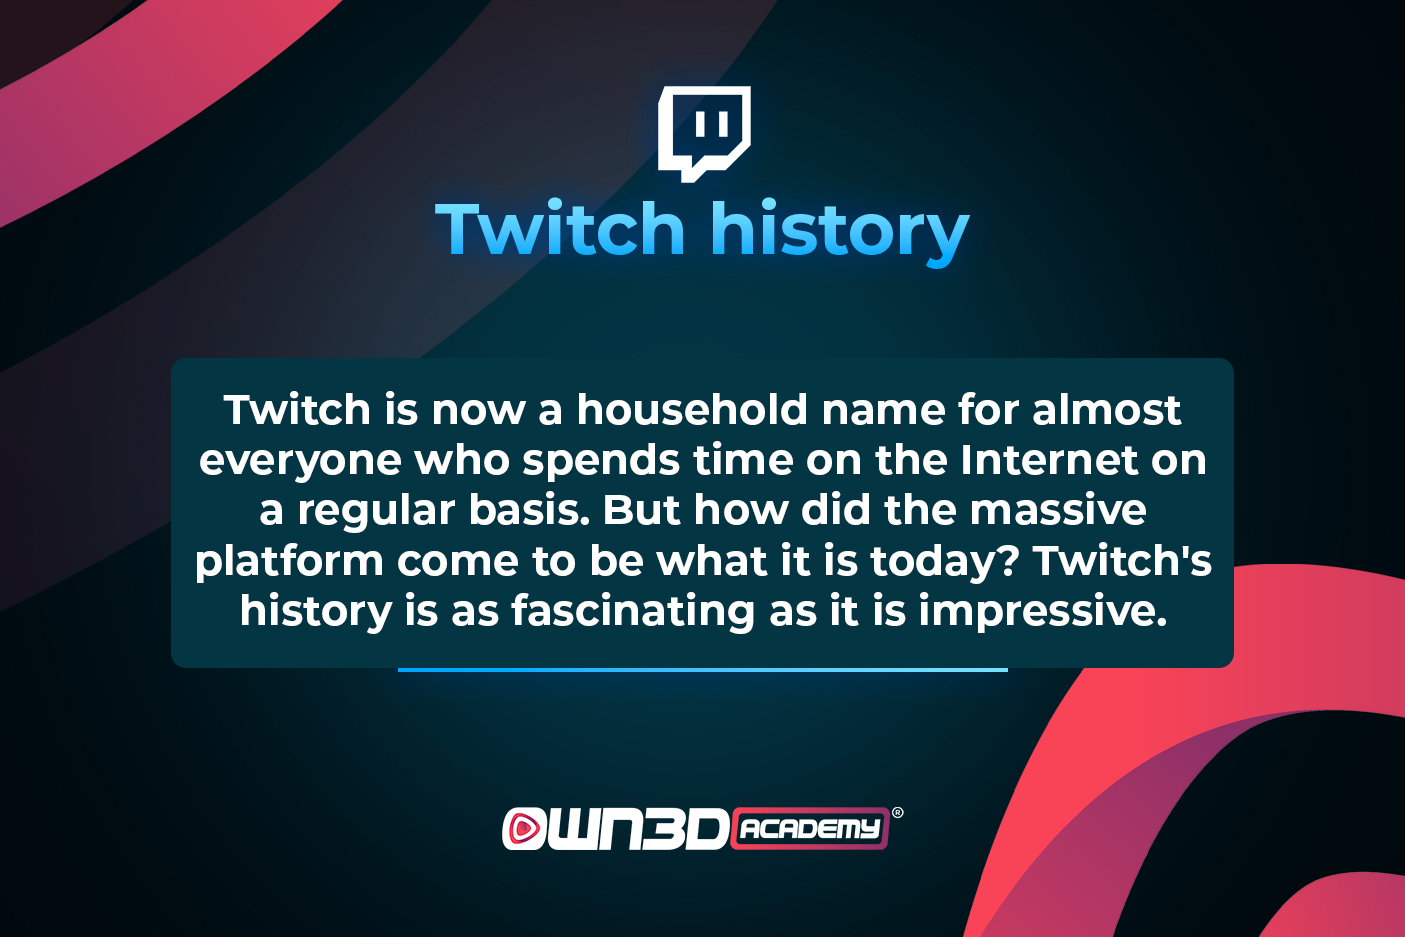 TWITCH_History-and-Keyfacts_ENG_twitch-history.jpg